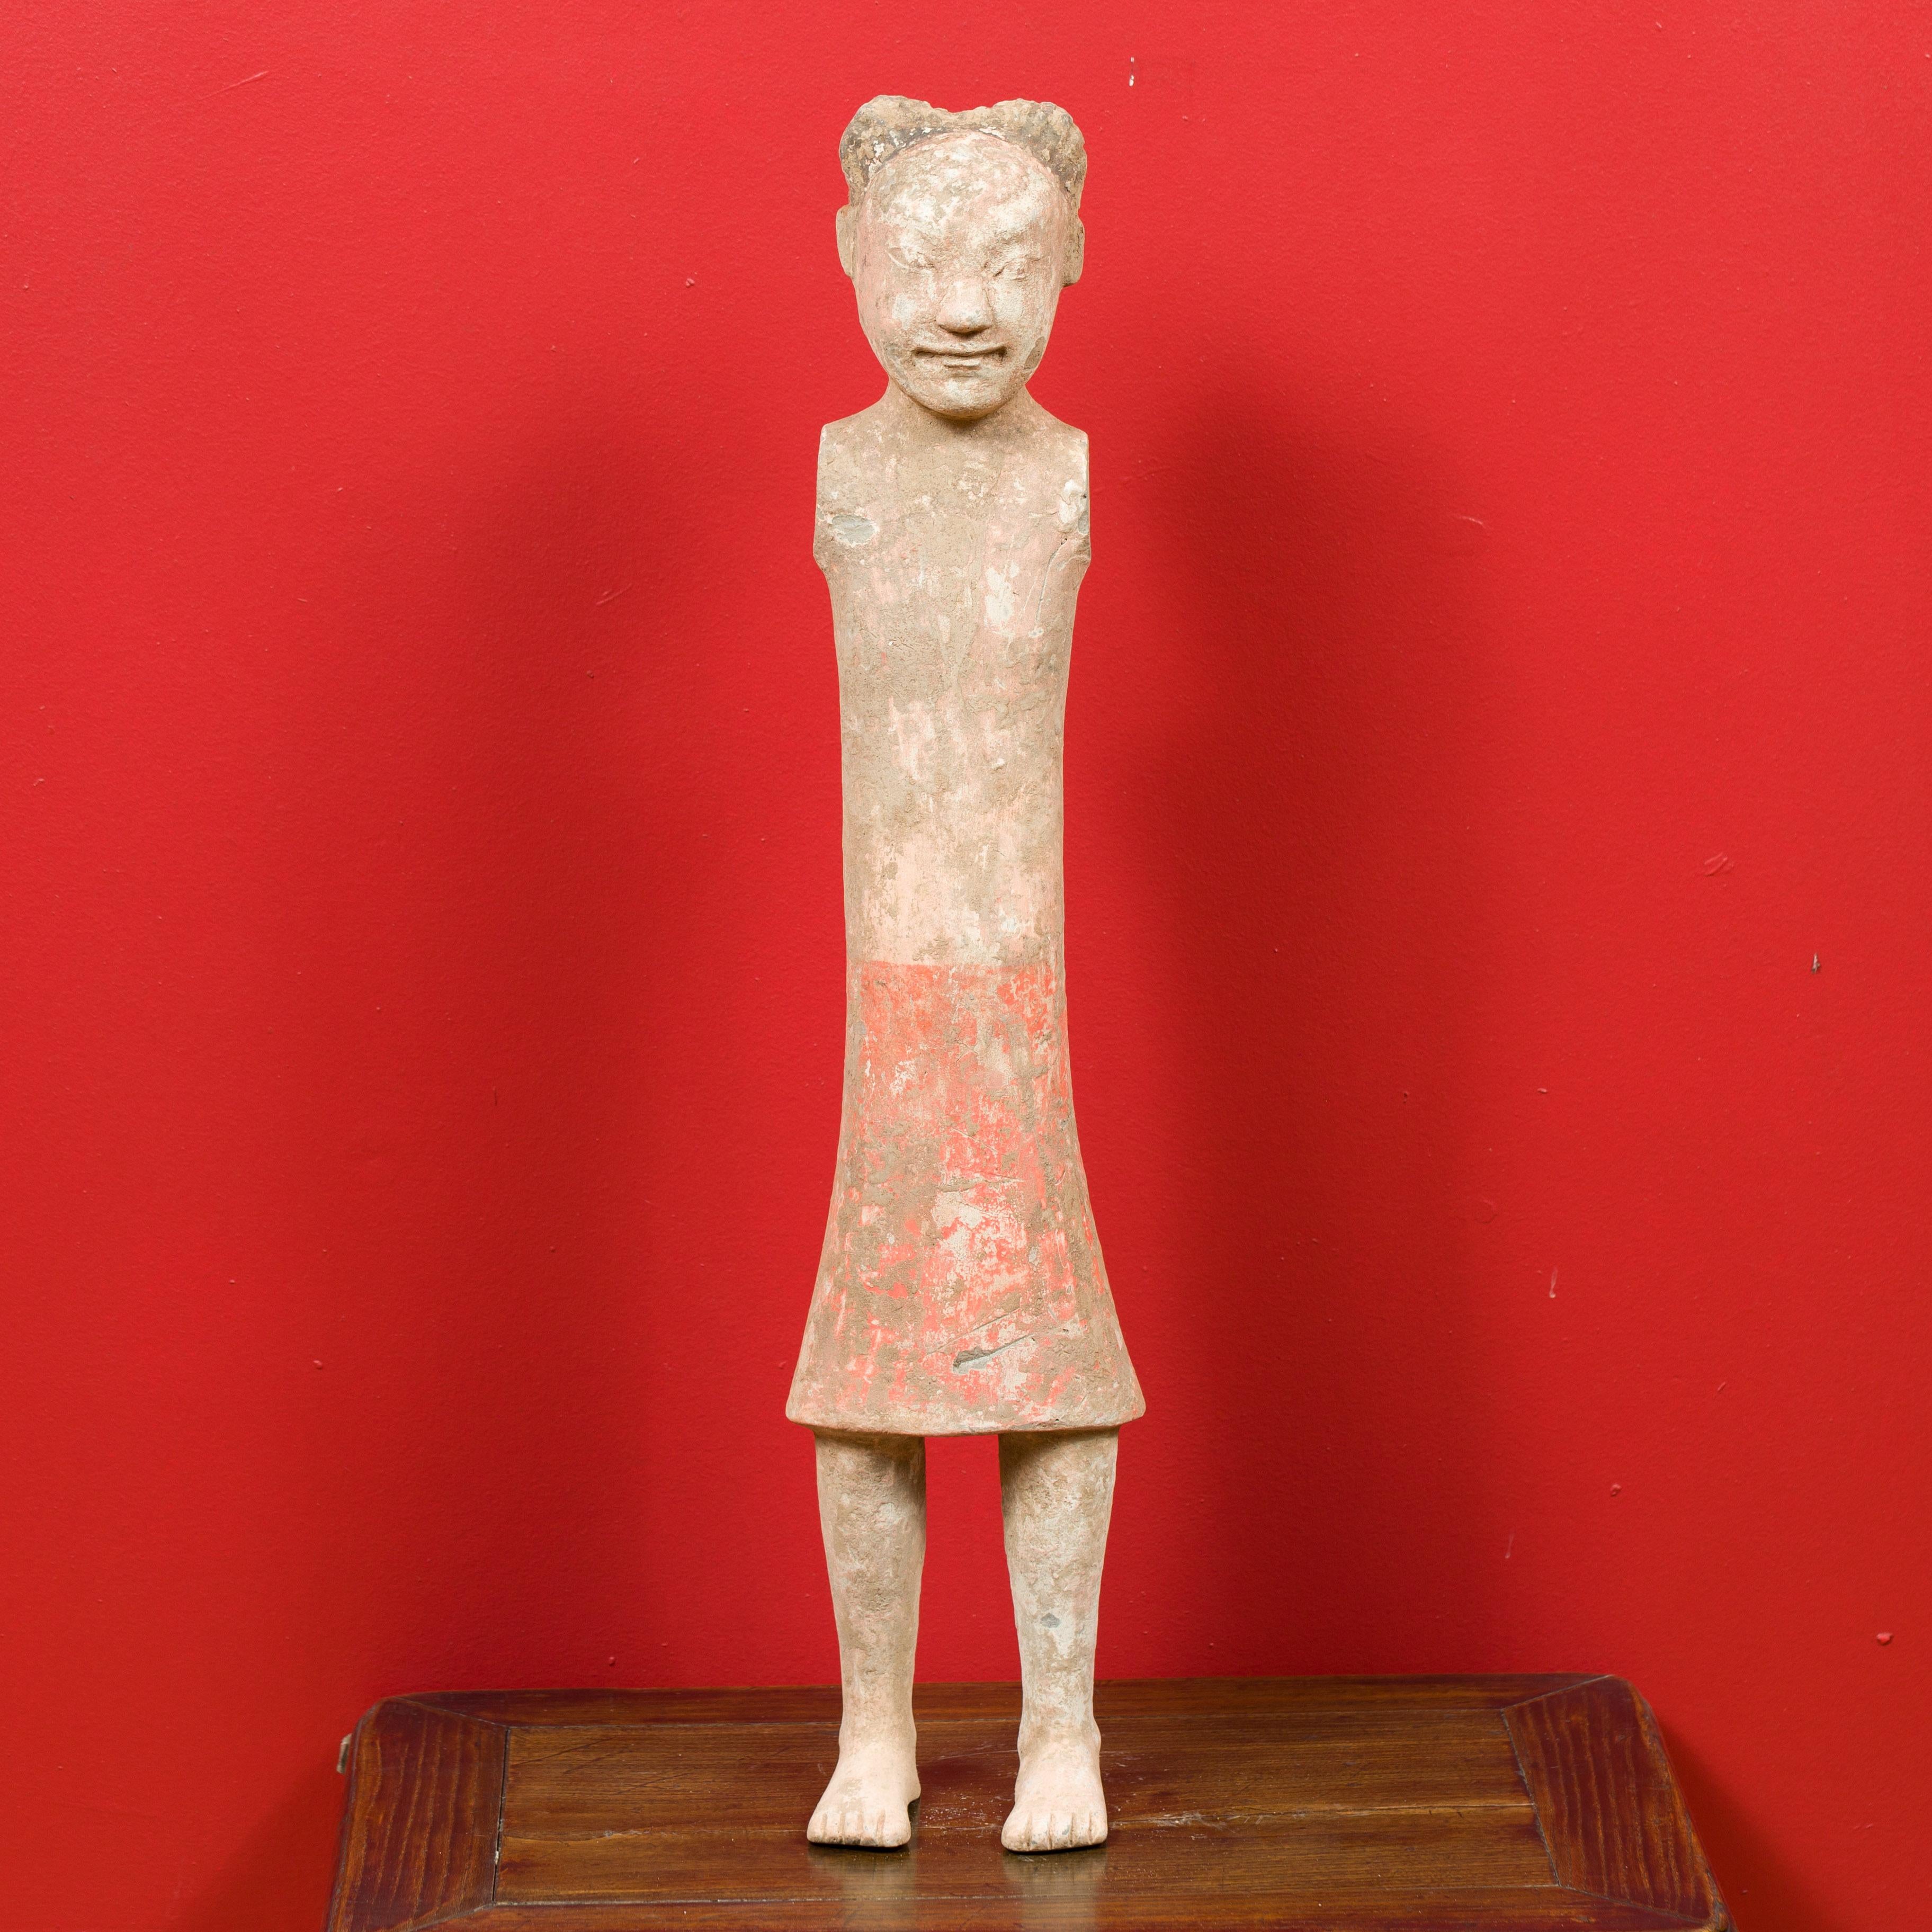 A Chinese Western Han dynasty period armless figurine with parted hairdo, long skirt and original polychromy. Born in China during the Western Han dynasty (206 BC-24 AD), this bare-chested and armless figurine features a surface showing its original